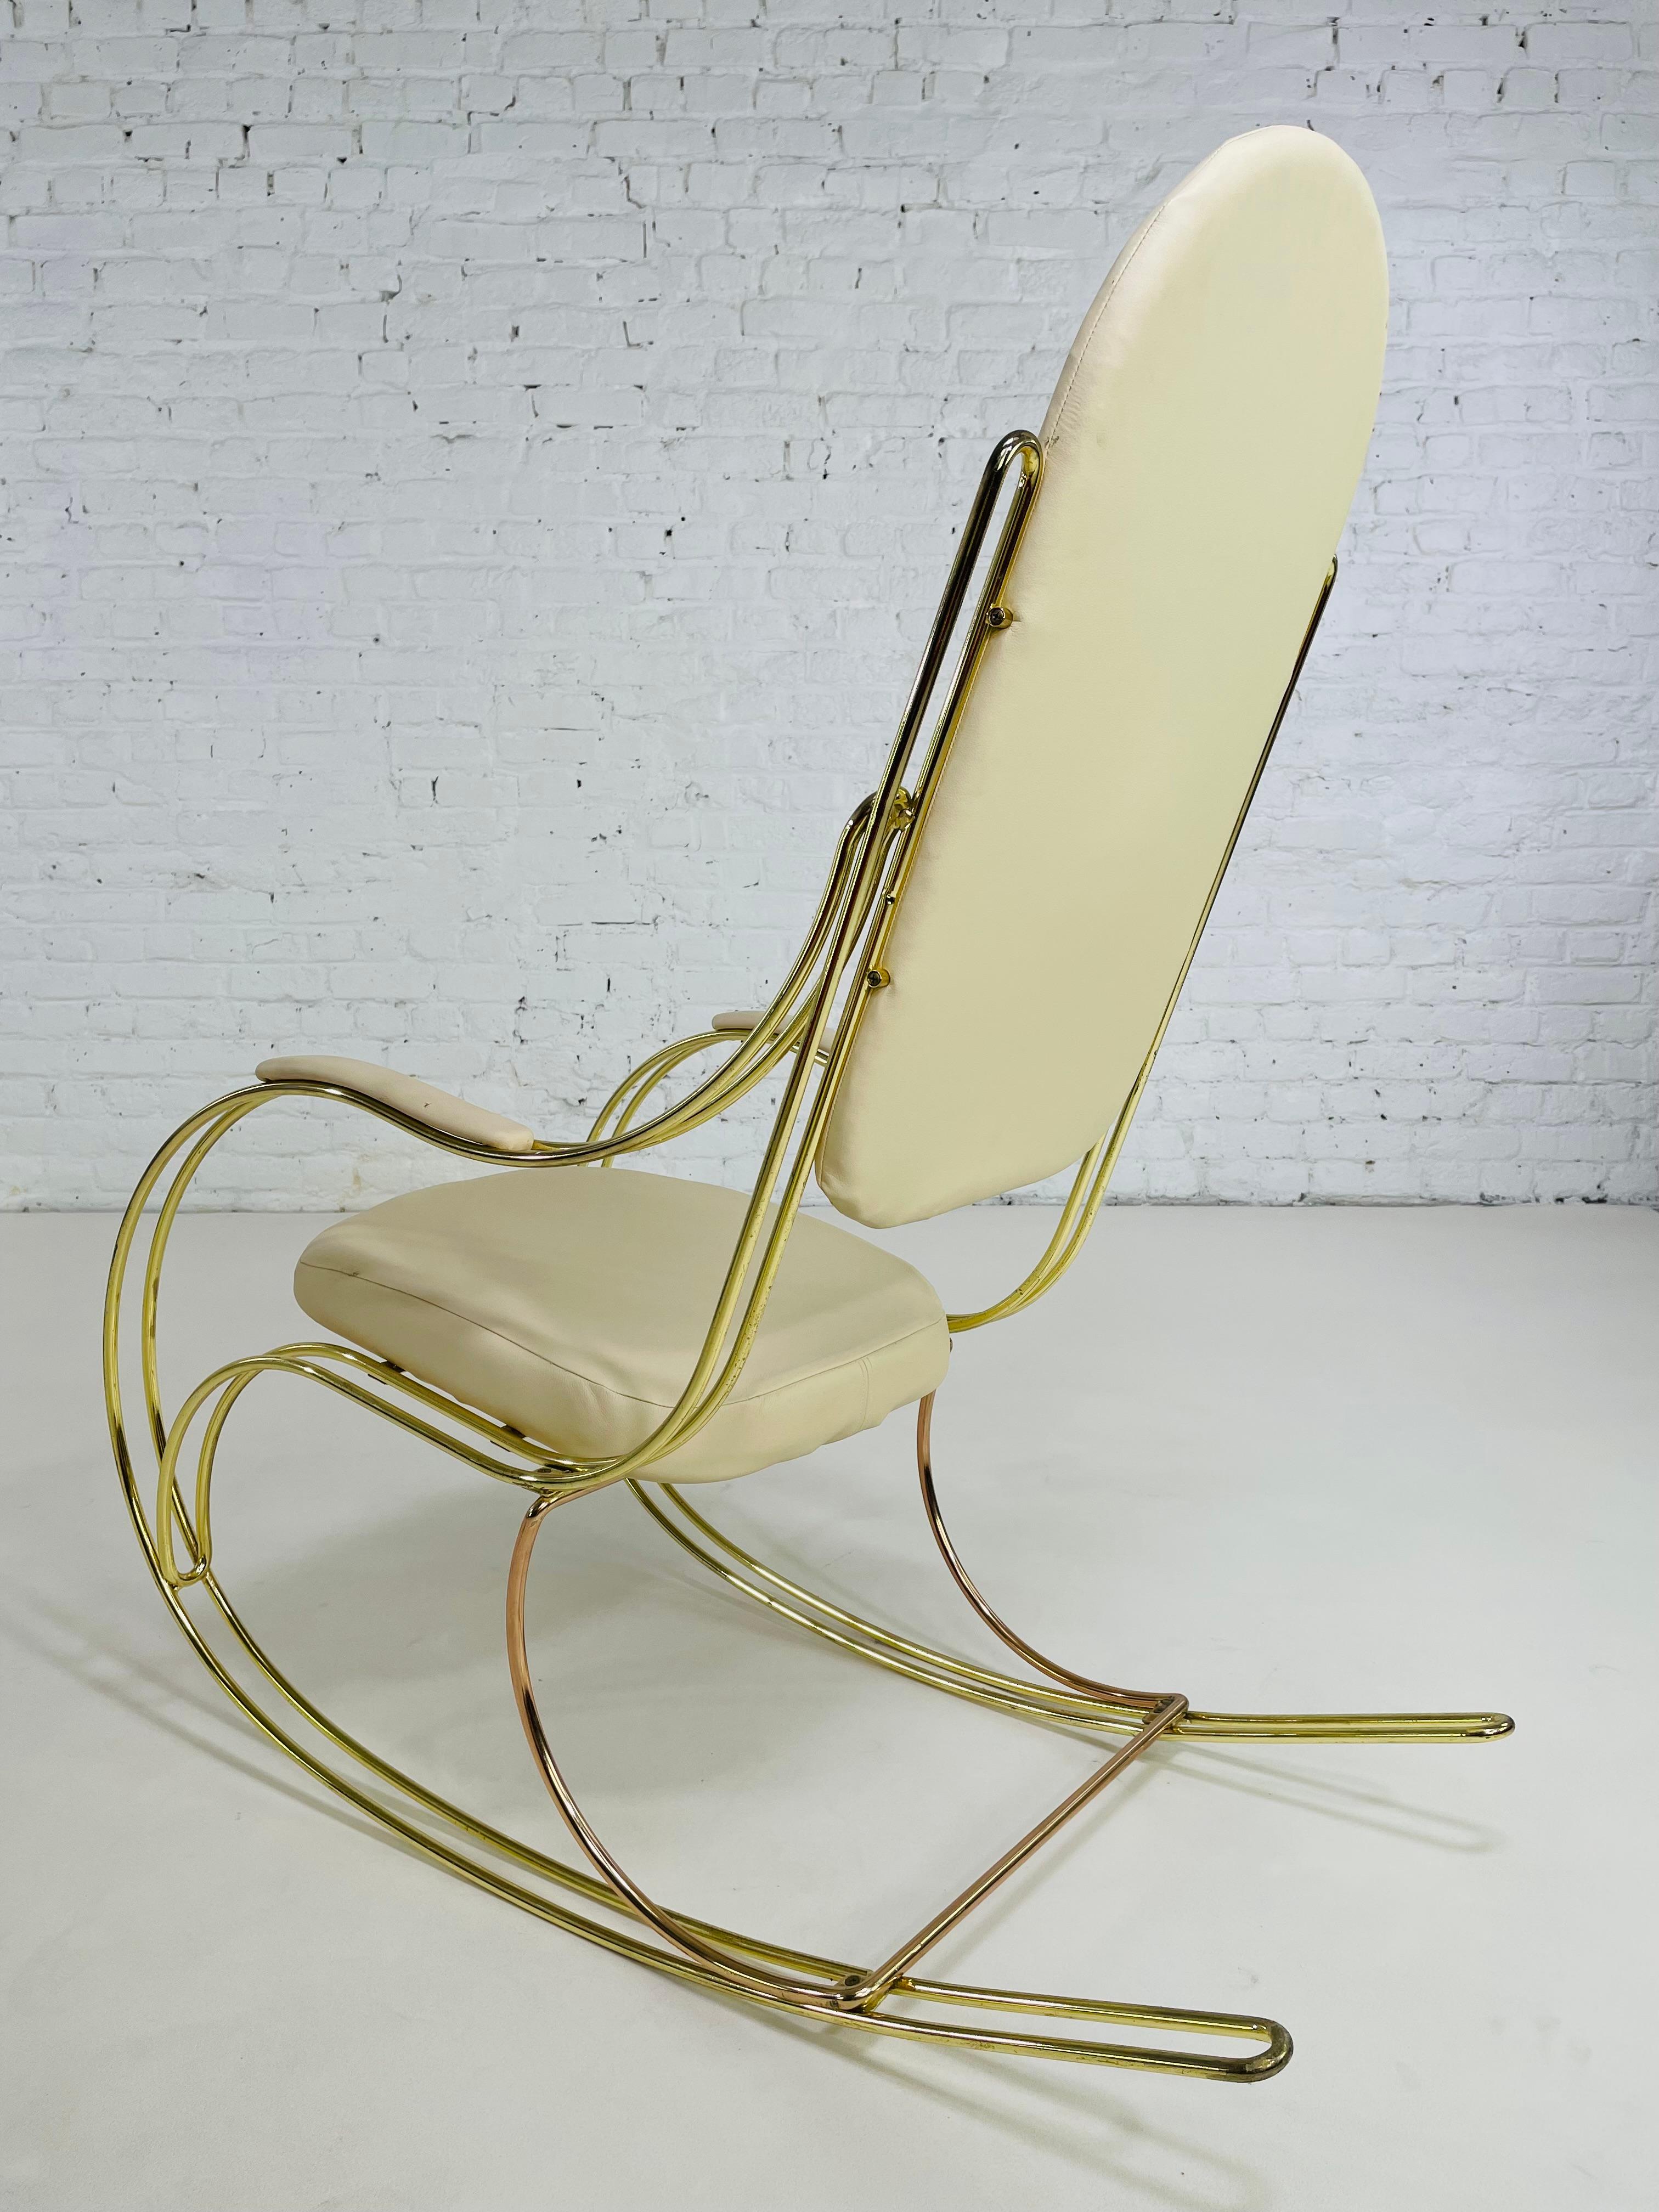 1960s-1970s Brass And Beige Faux Leather Rocking Chair For Sale 5